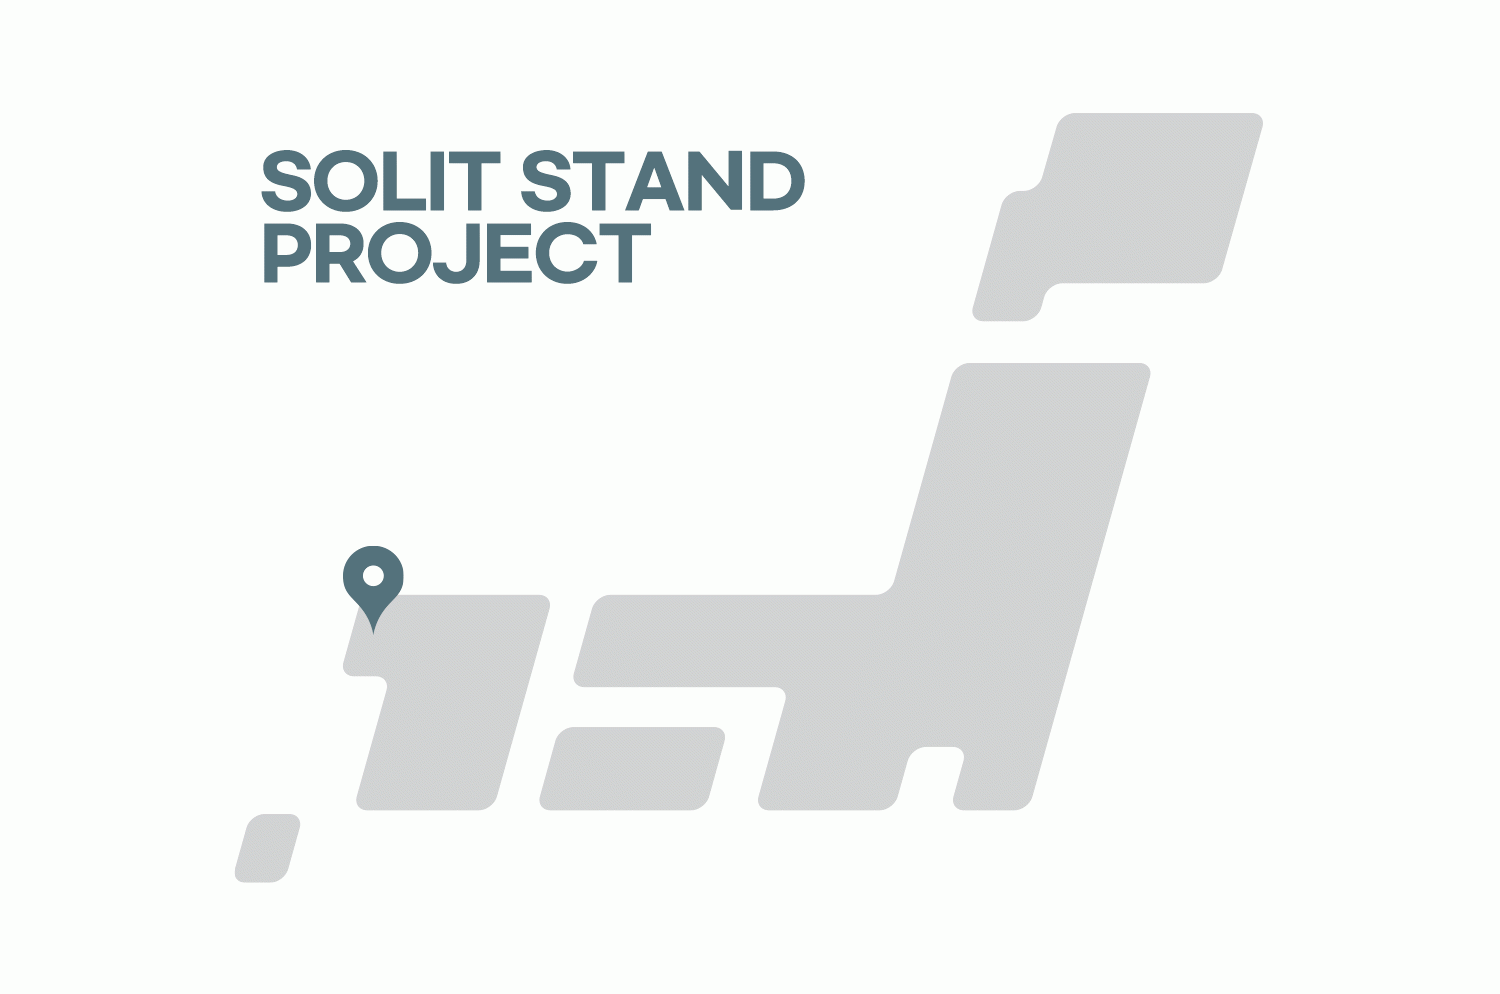 SOLIT STAND